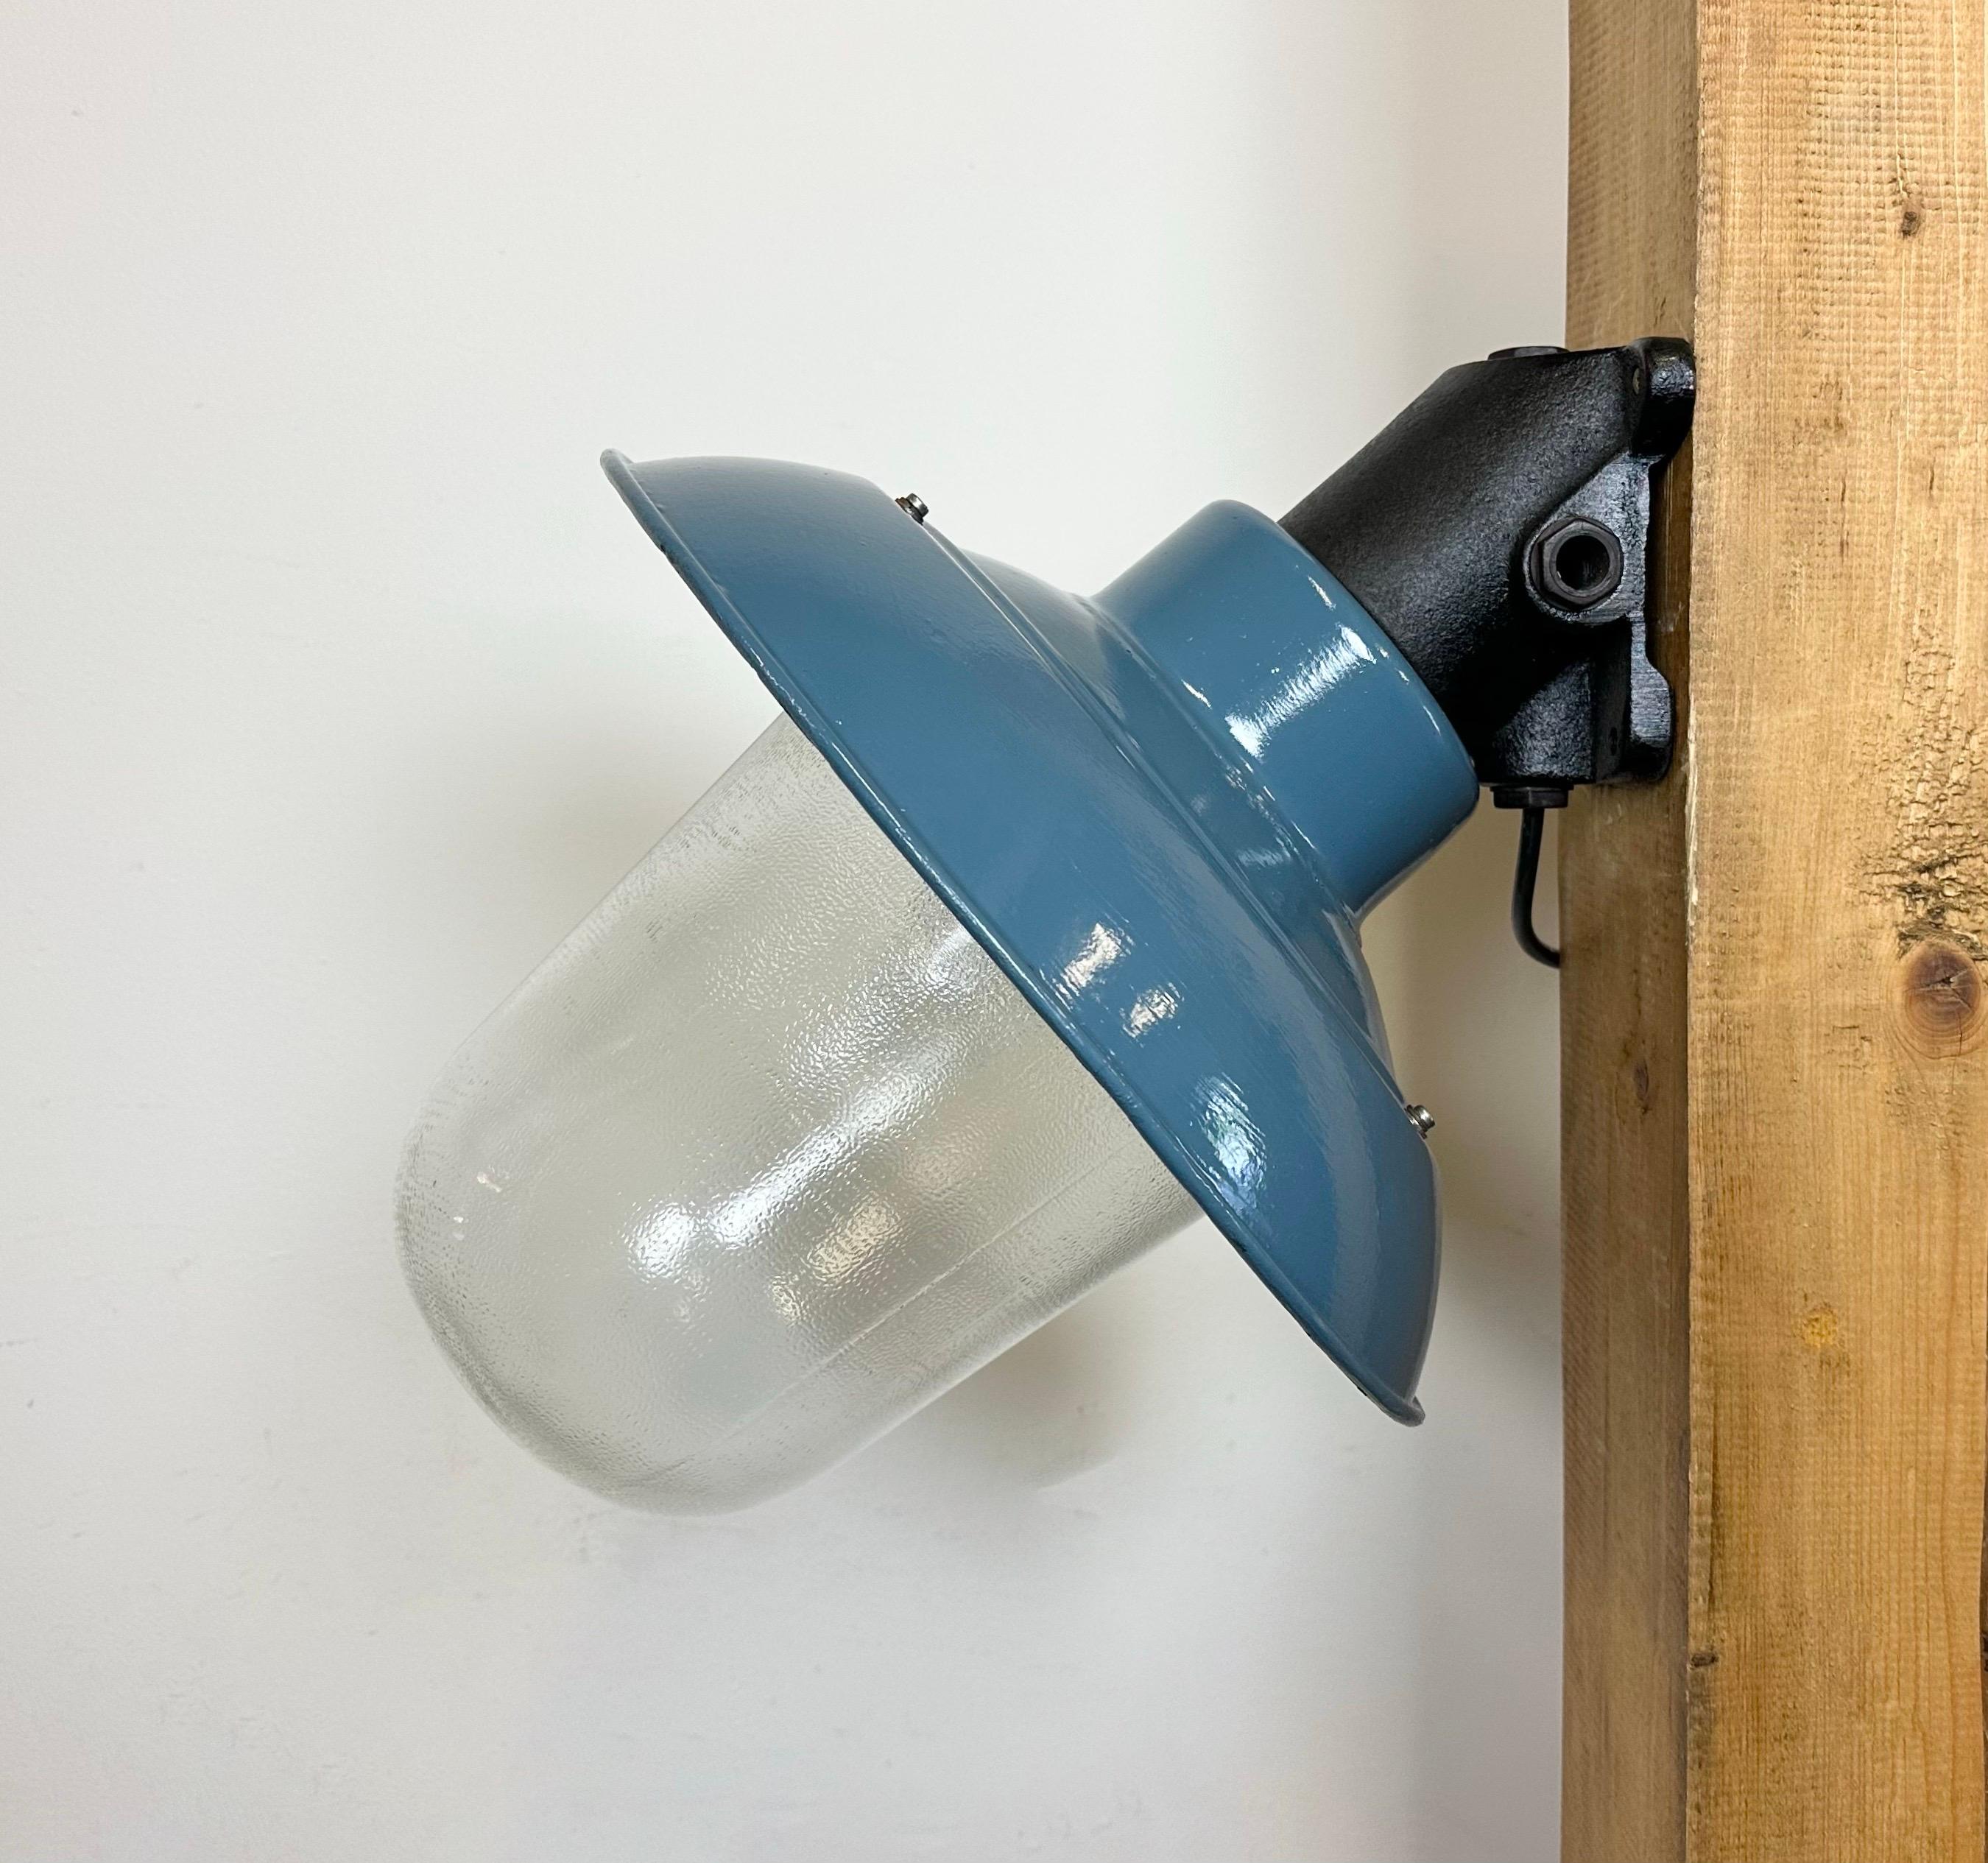 This Industrial wall lamp was designed in the 1960s and produced by Elektrosvit in the former Czechoslovakia. It features a cast iron wall mounting, a newly blue painted shade with a white enamel interior and a frosted glass cover. New porcelain